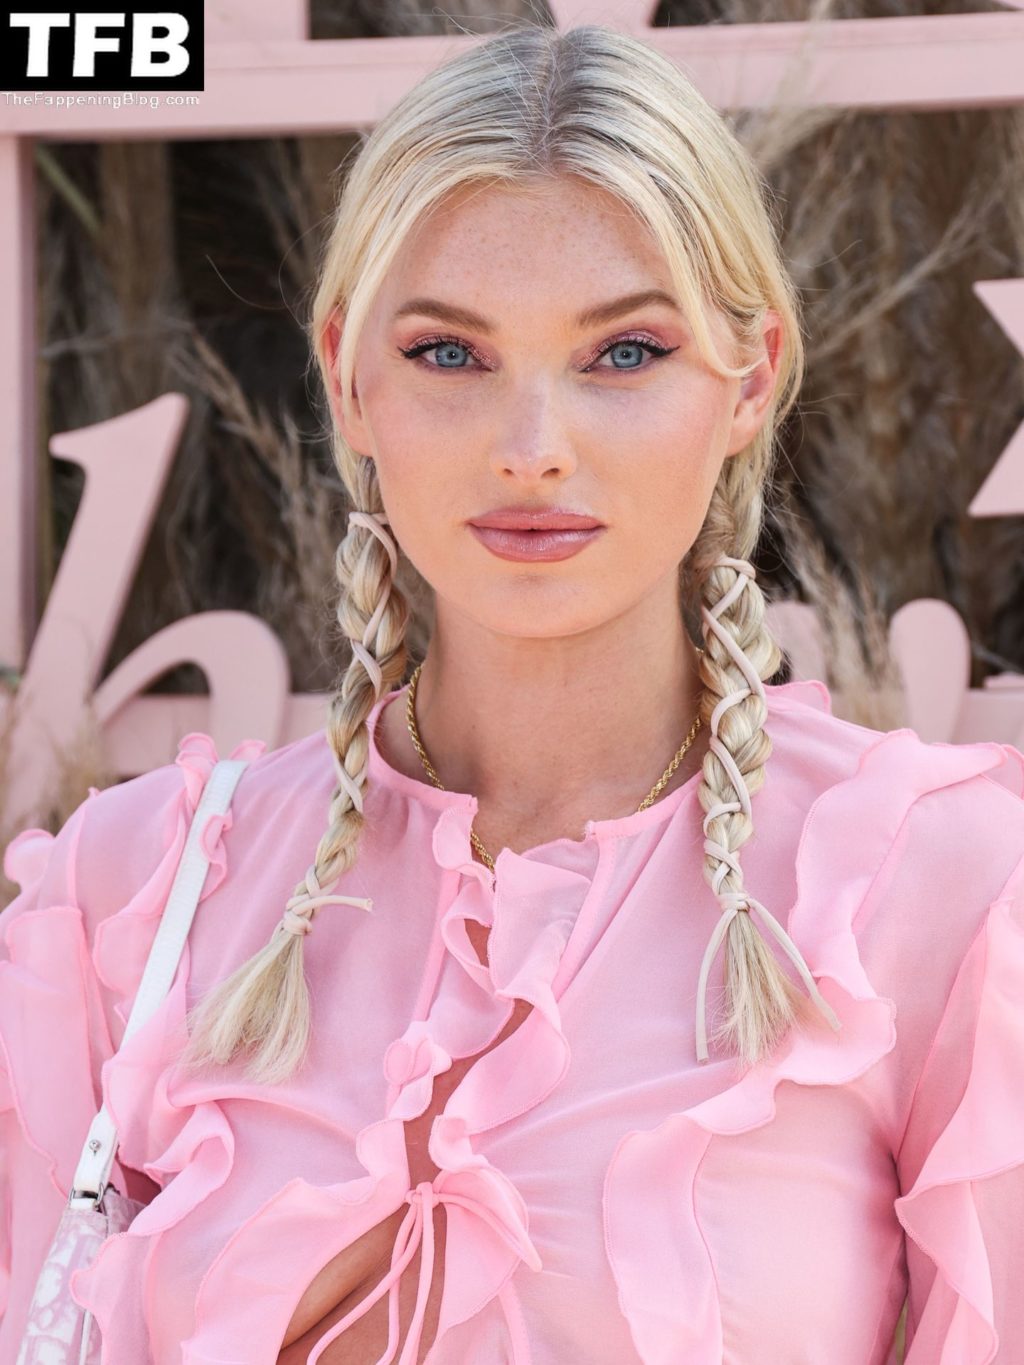 Elsa Hosk Poses Braless at Revolve Festival at the Coachella Valley Music and Arts Festival (27 Photos)